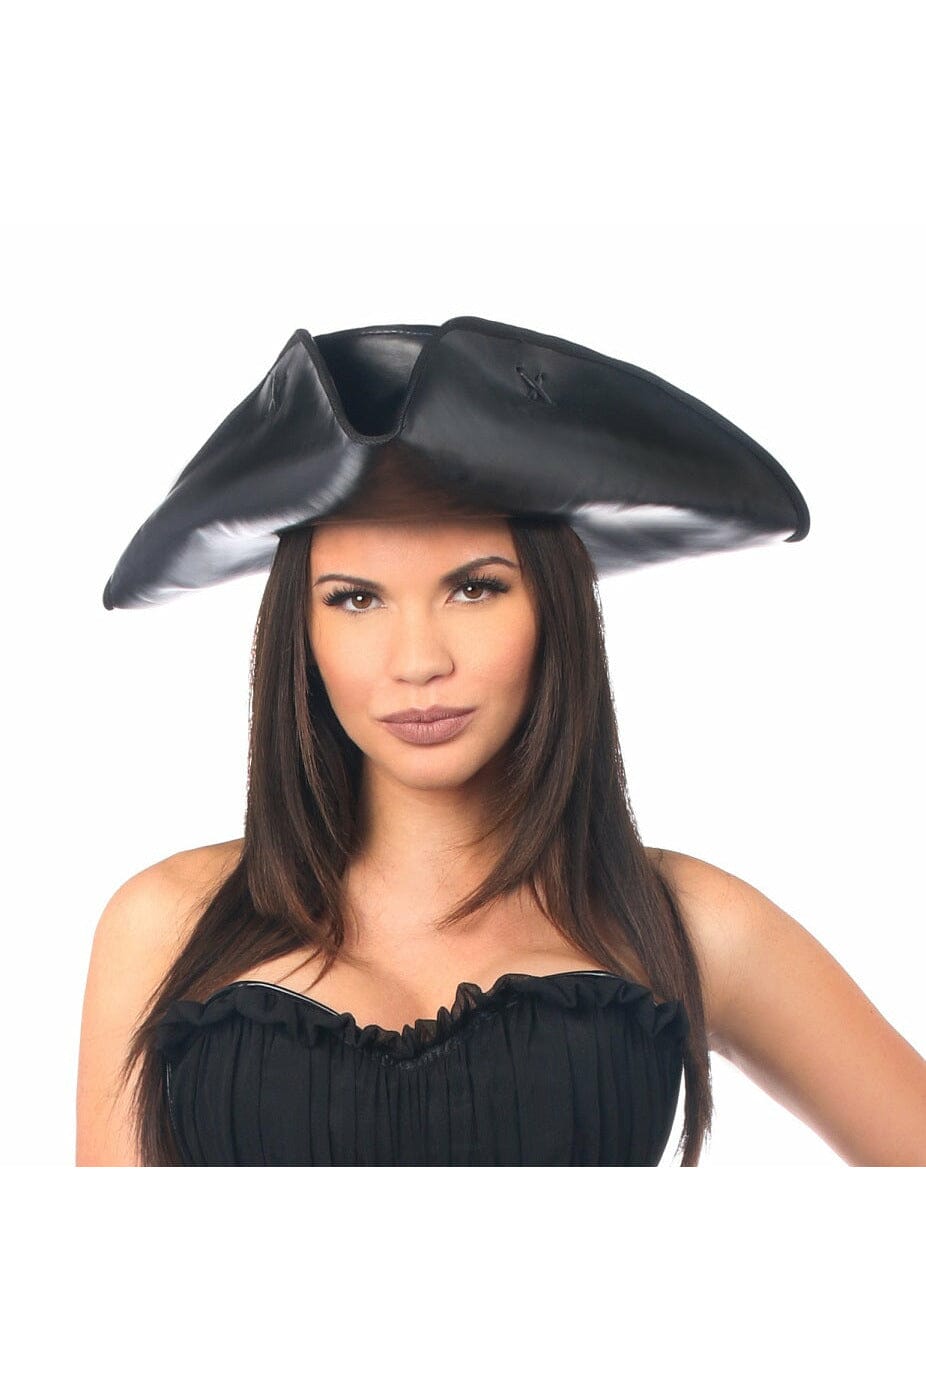 Black Faux Leather Pirate Hat-Costume Hats-Daisy Corsets-Black-O/S-SEXYSHOES.COM